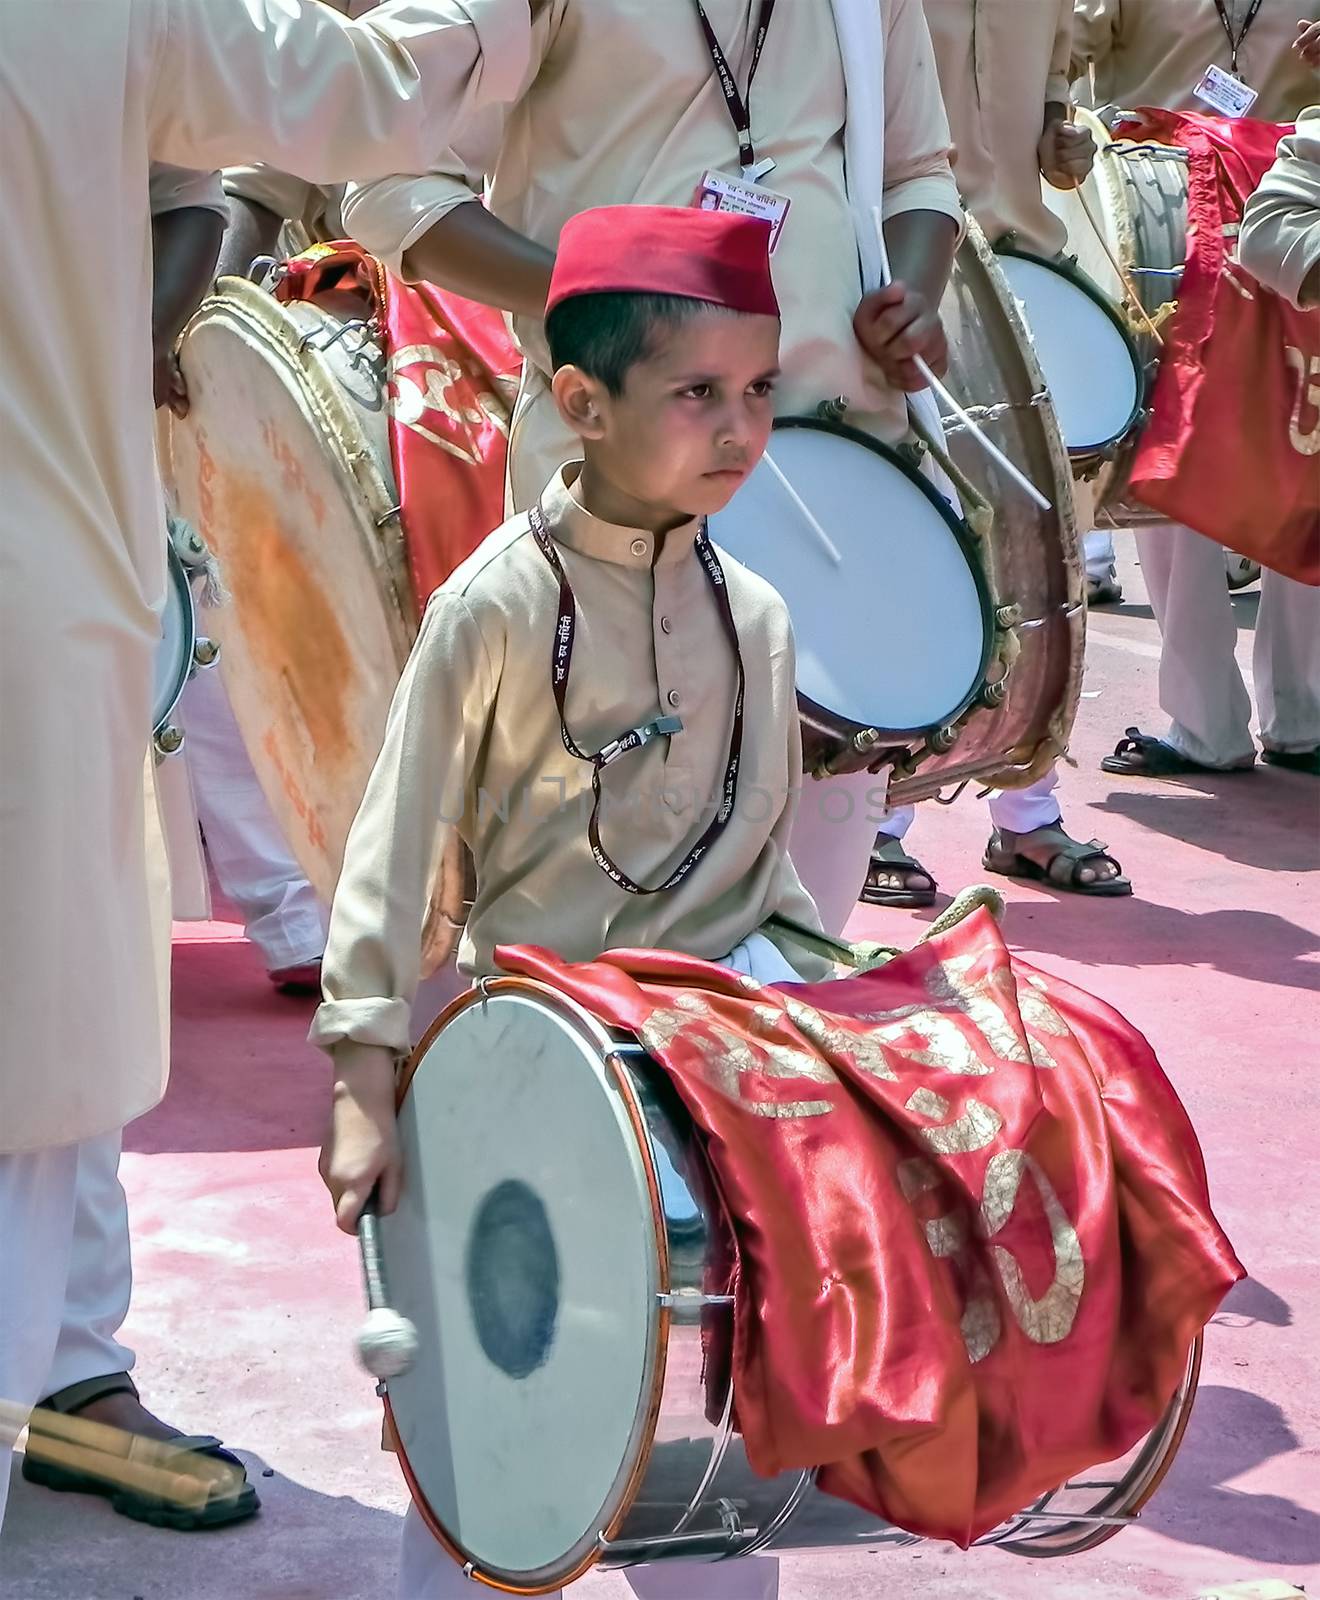 Little boy with red cap beating huge traditional dhol during Ganesh festival. by lalam